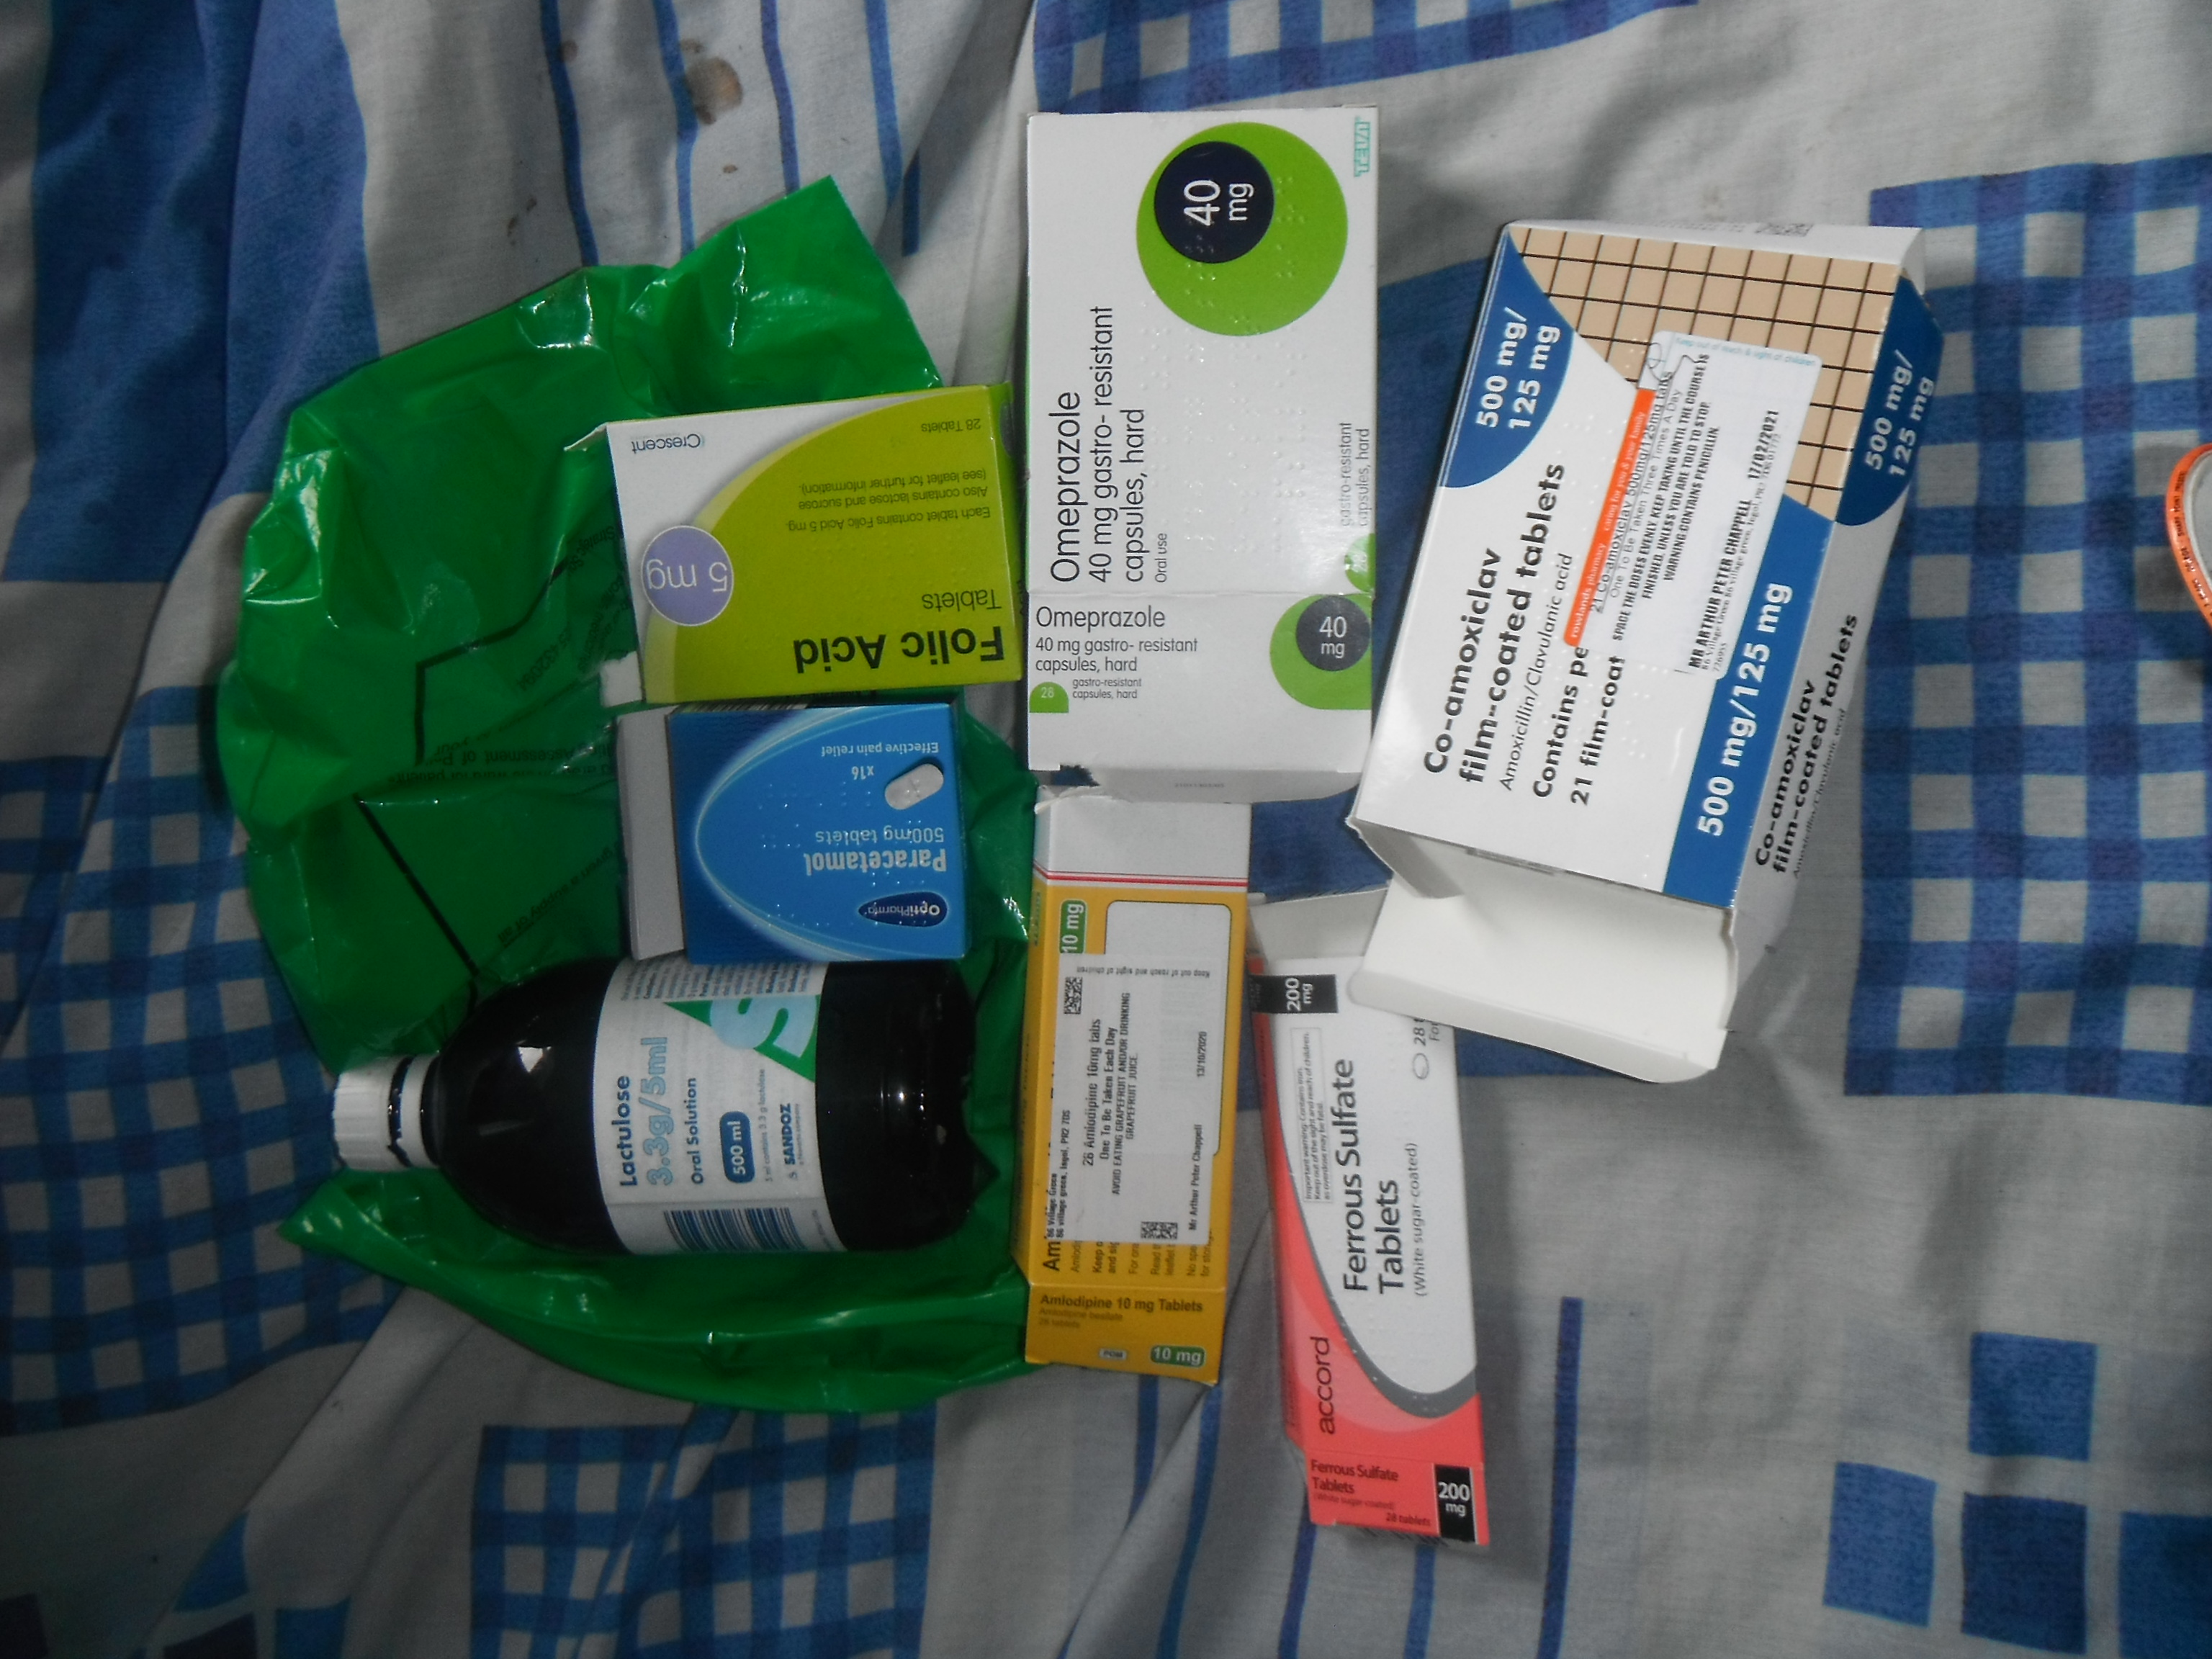 Photo taken by me - my current medications